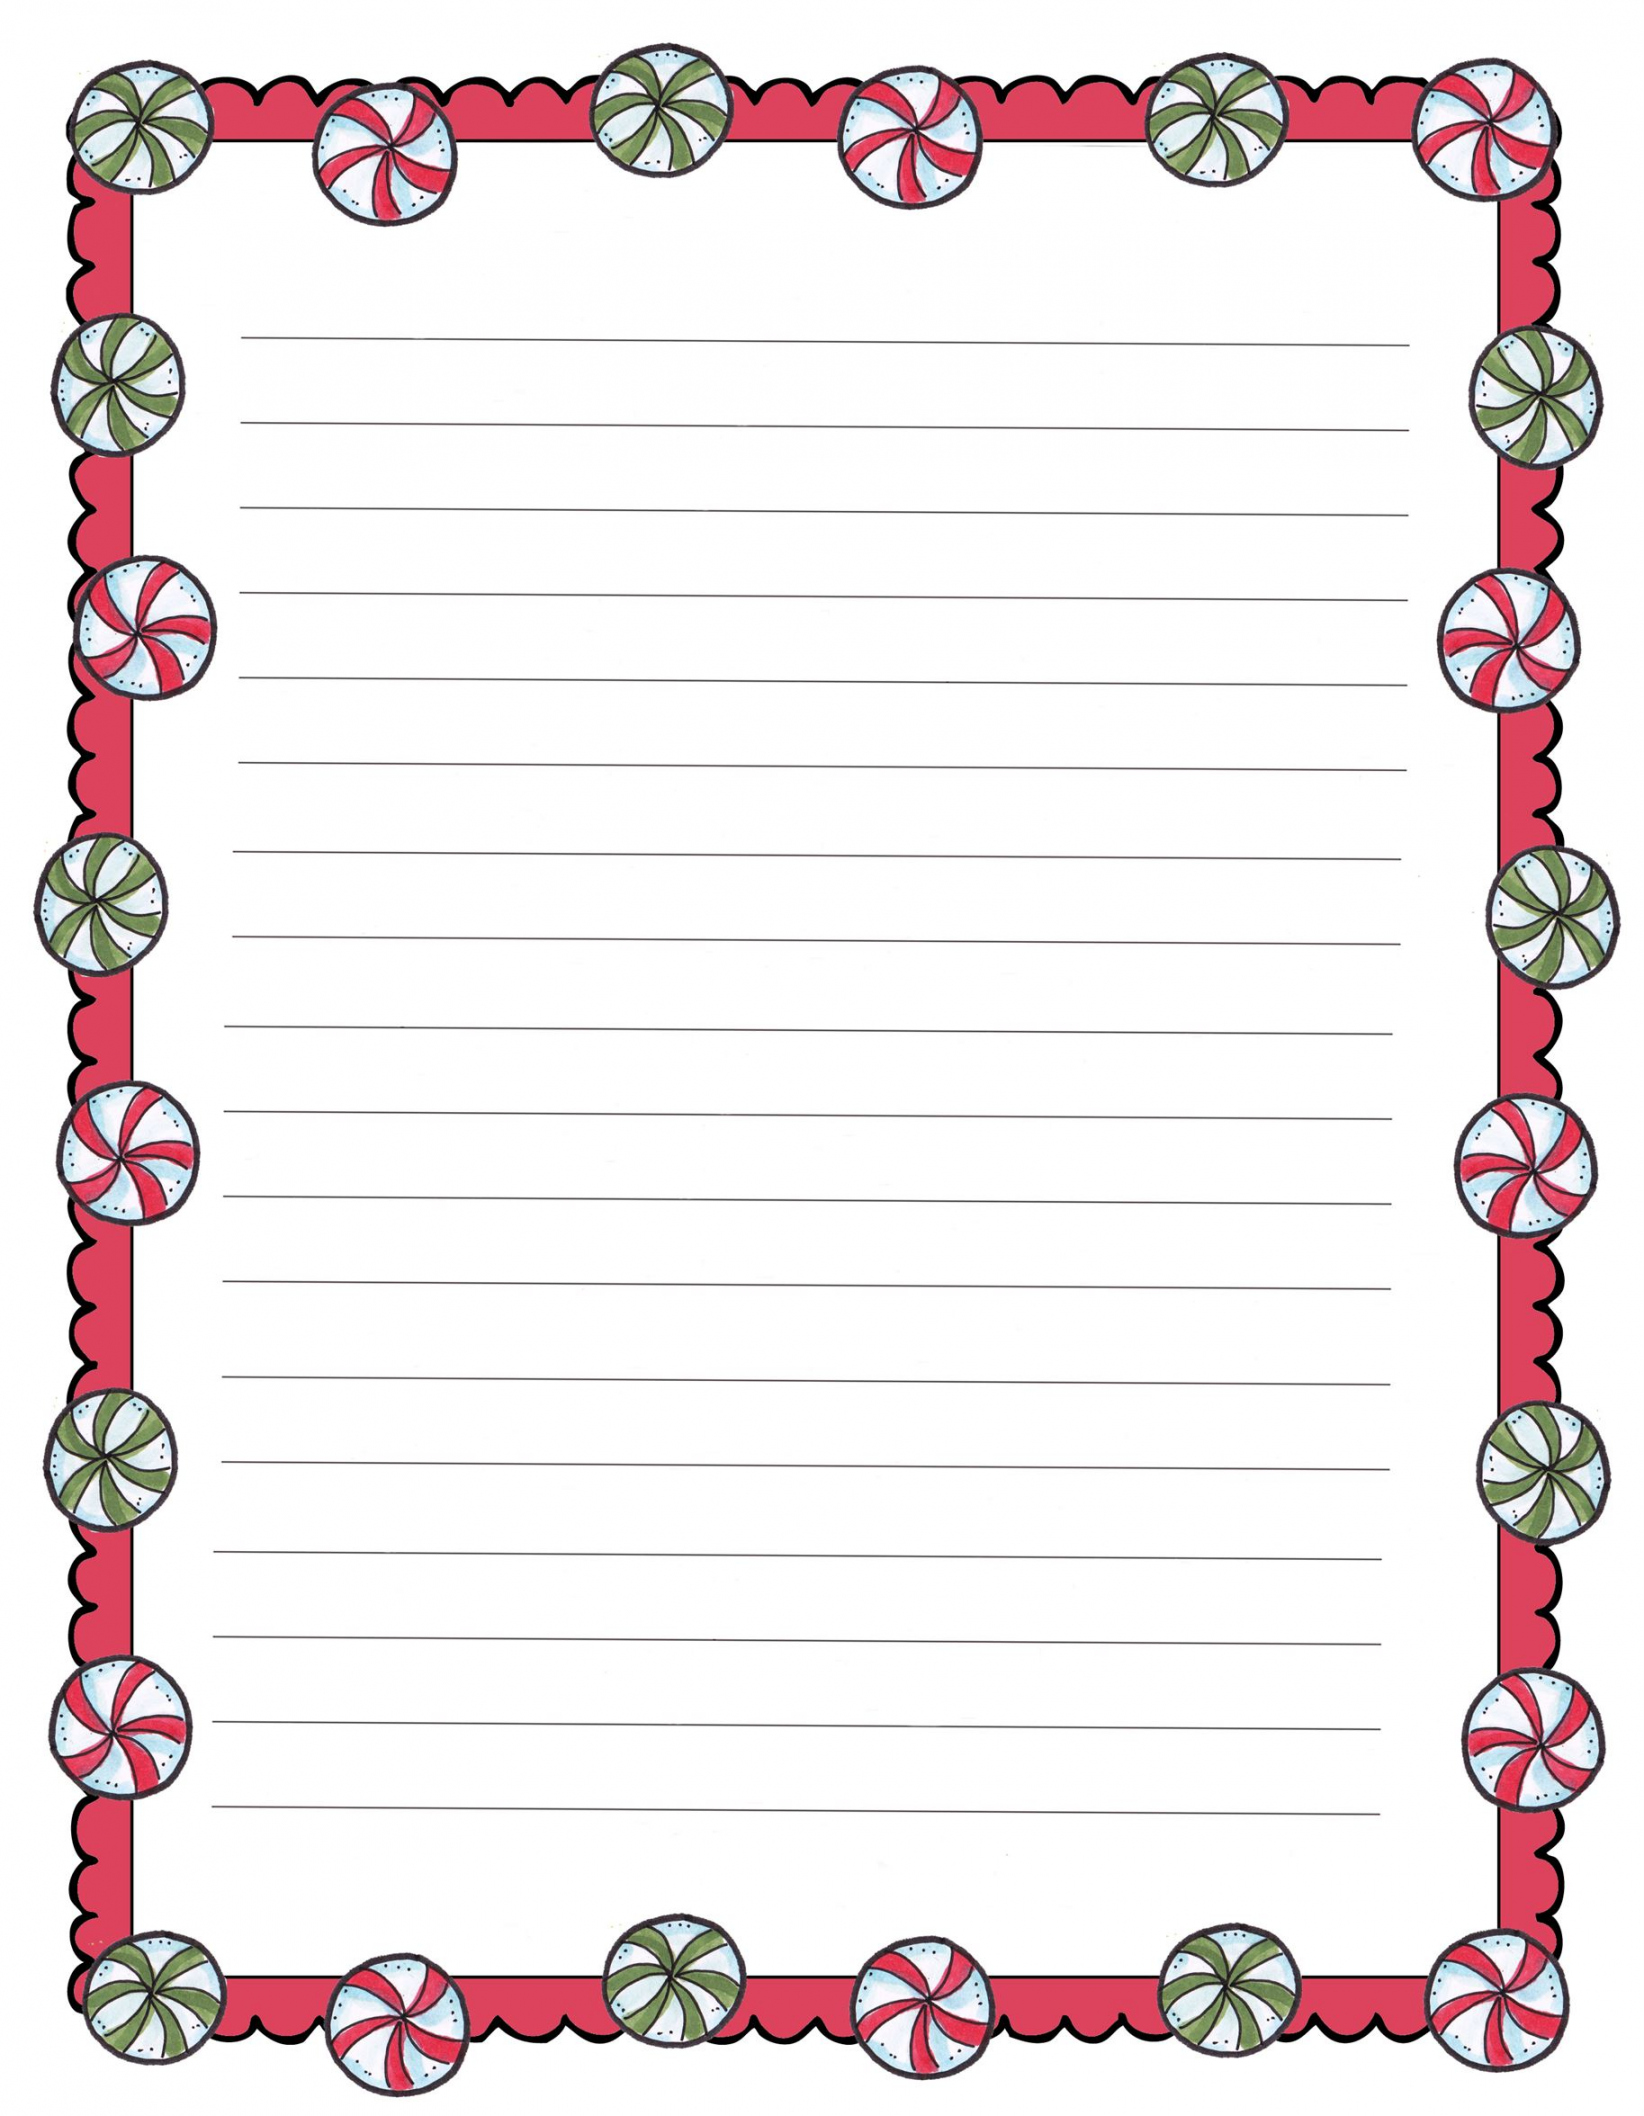 Printable Christmas Notepaper, Stationery:  Free Designs - FREE Printables - Free Printable Christmas Stationery